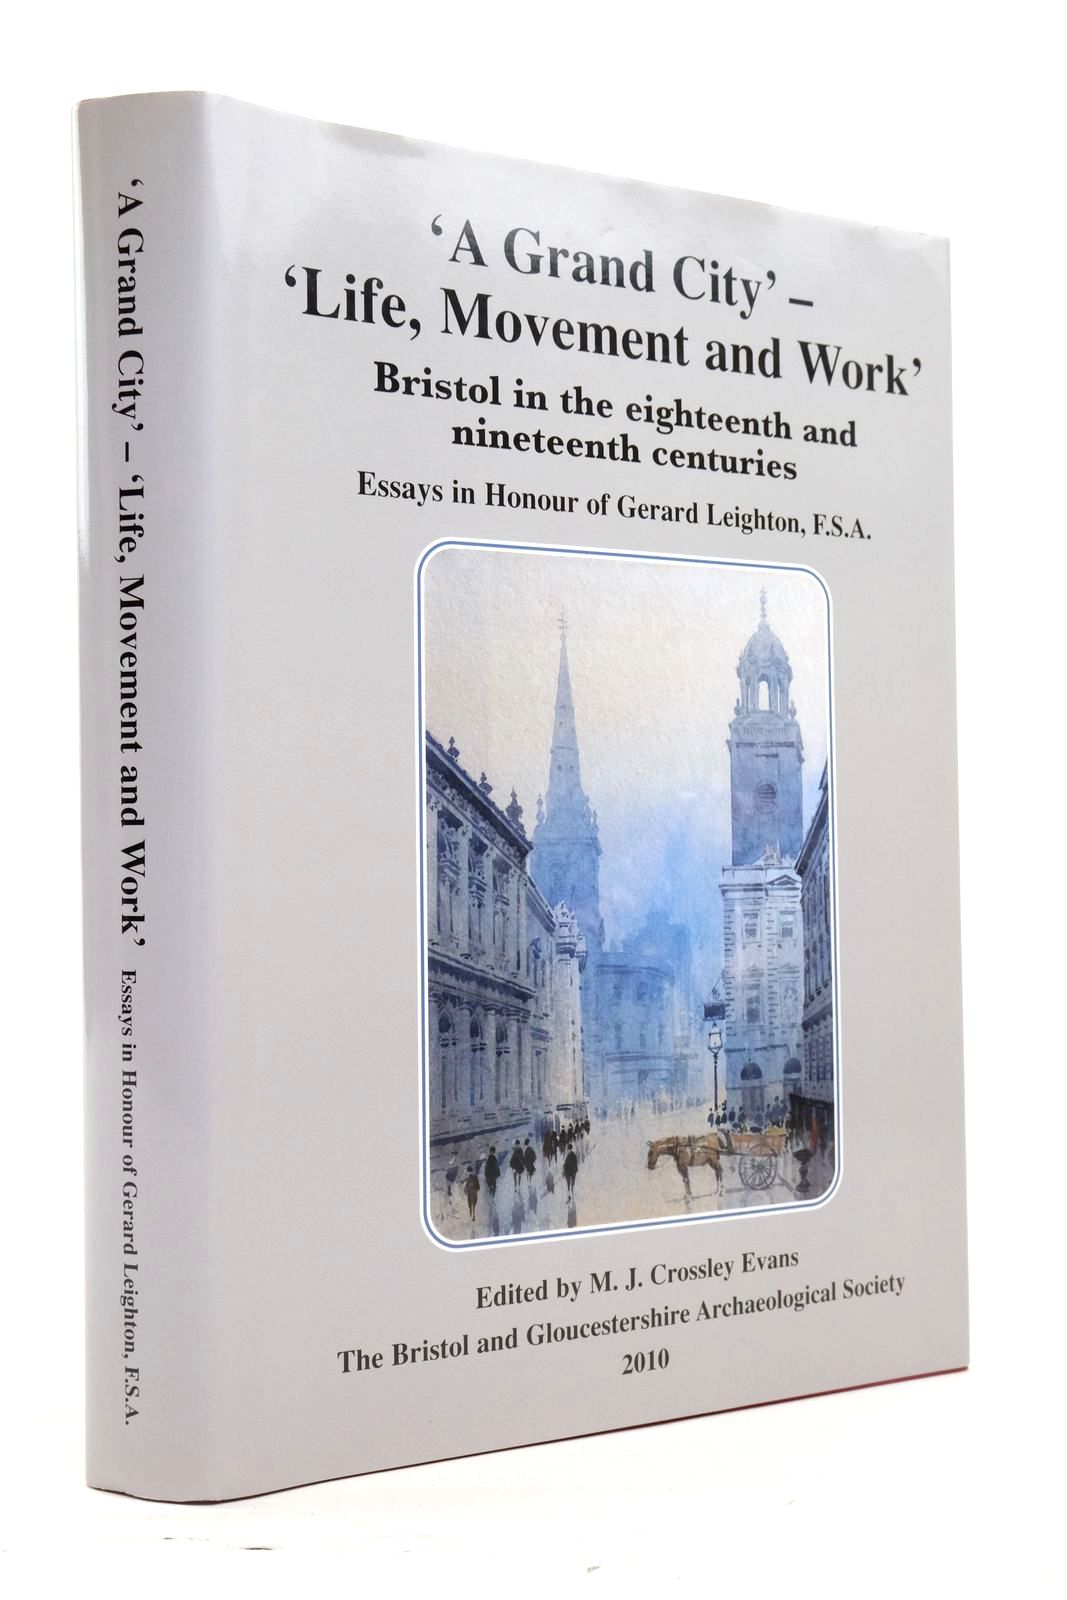 Photo of A GRAND CITY - LIFE, MOVEMENT AND WORK: BRISTOL IN THE EIGHTEENTH AND NINETEENTH CENTURIES written by Evans, M.J. Crossley published by Bristol and Gloucestershire Archaeological Society (STOCK CODE: 2137273)  for sale by Stella & Rose's Books